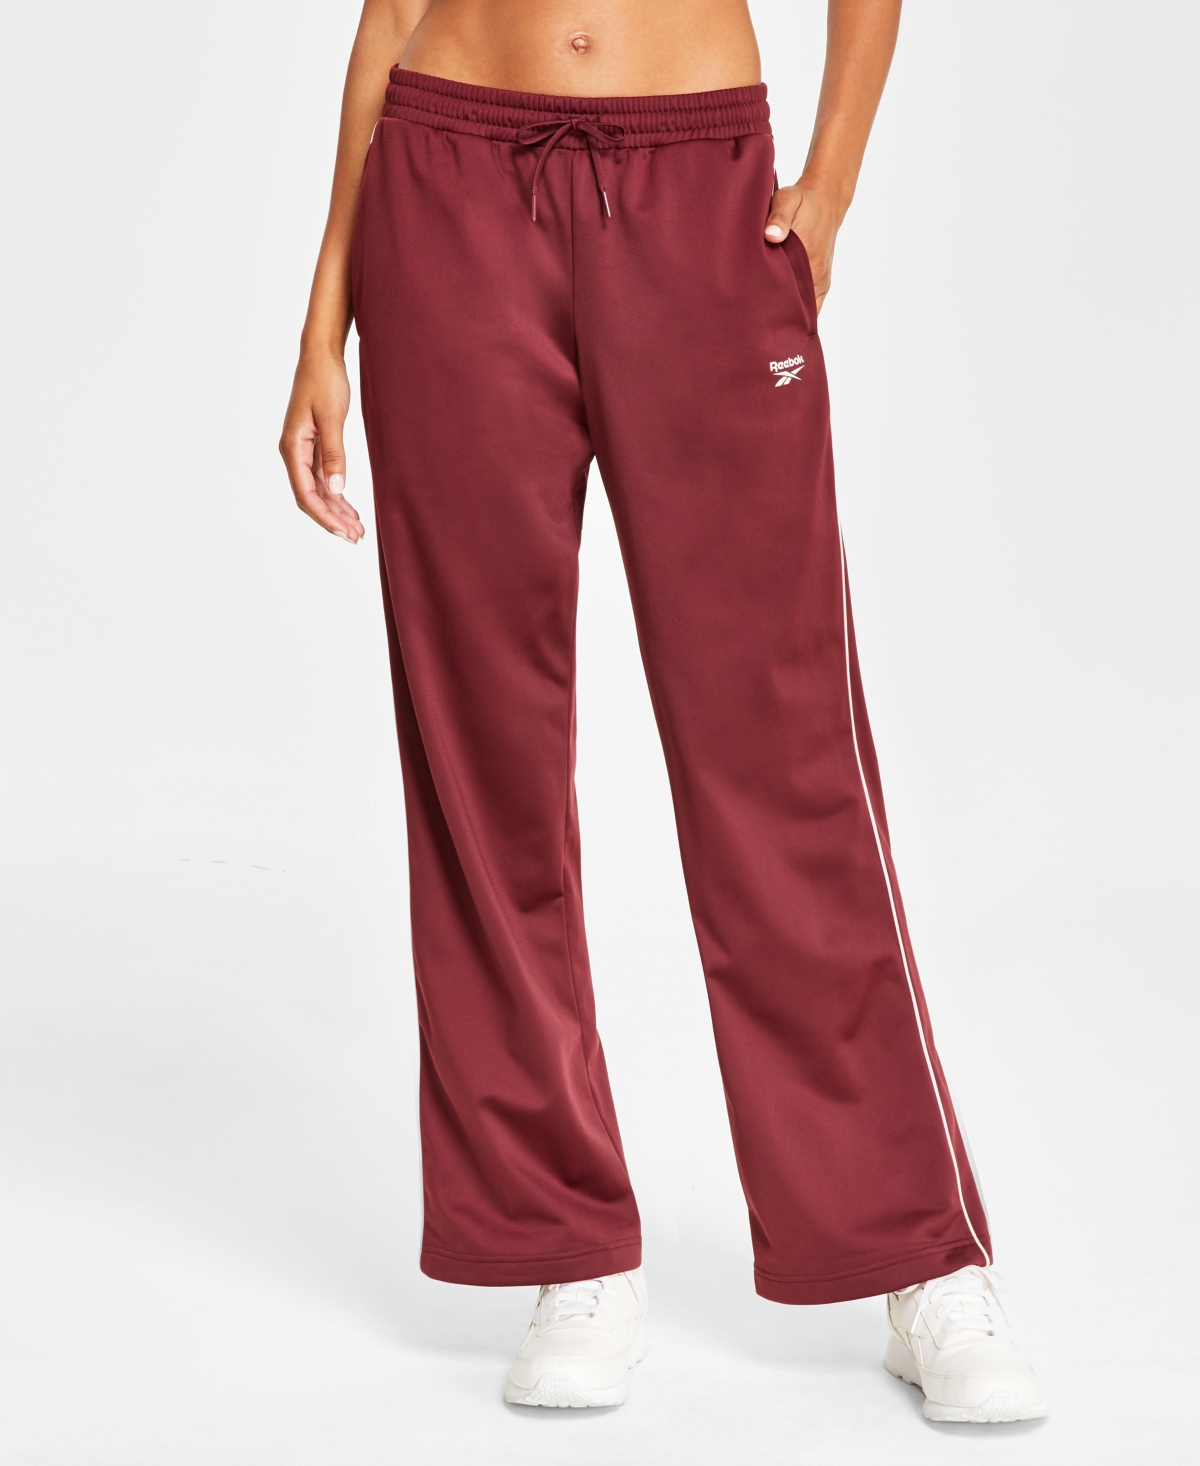 Women's Pull-On Drawstring Tricot Pants, A Macy's Exclusive - Seprpi